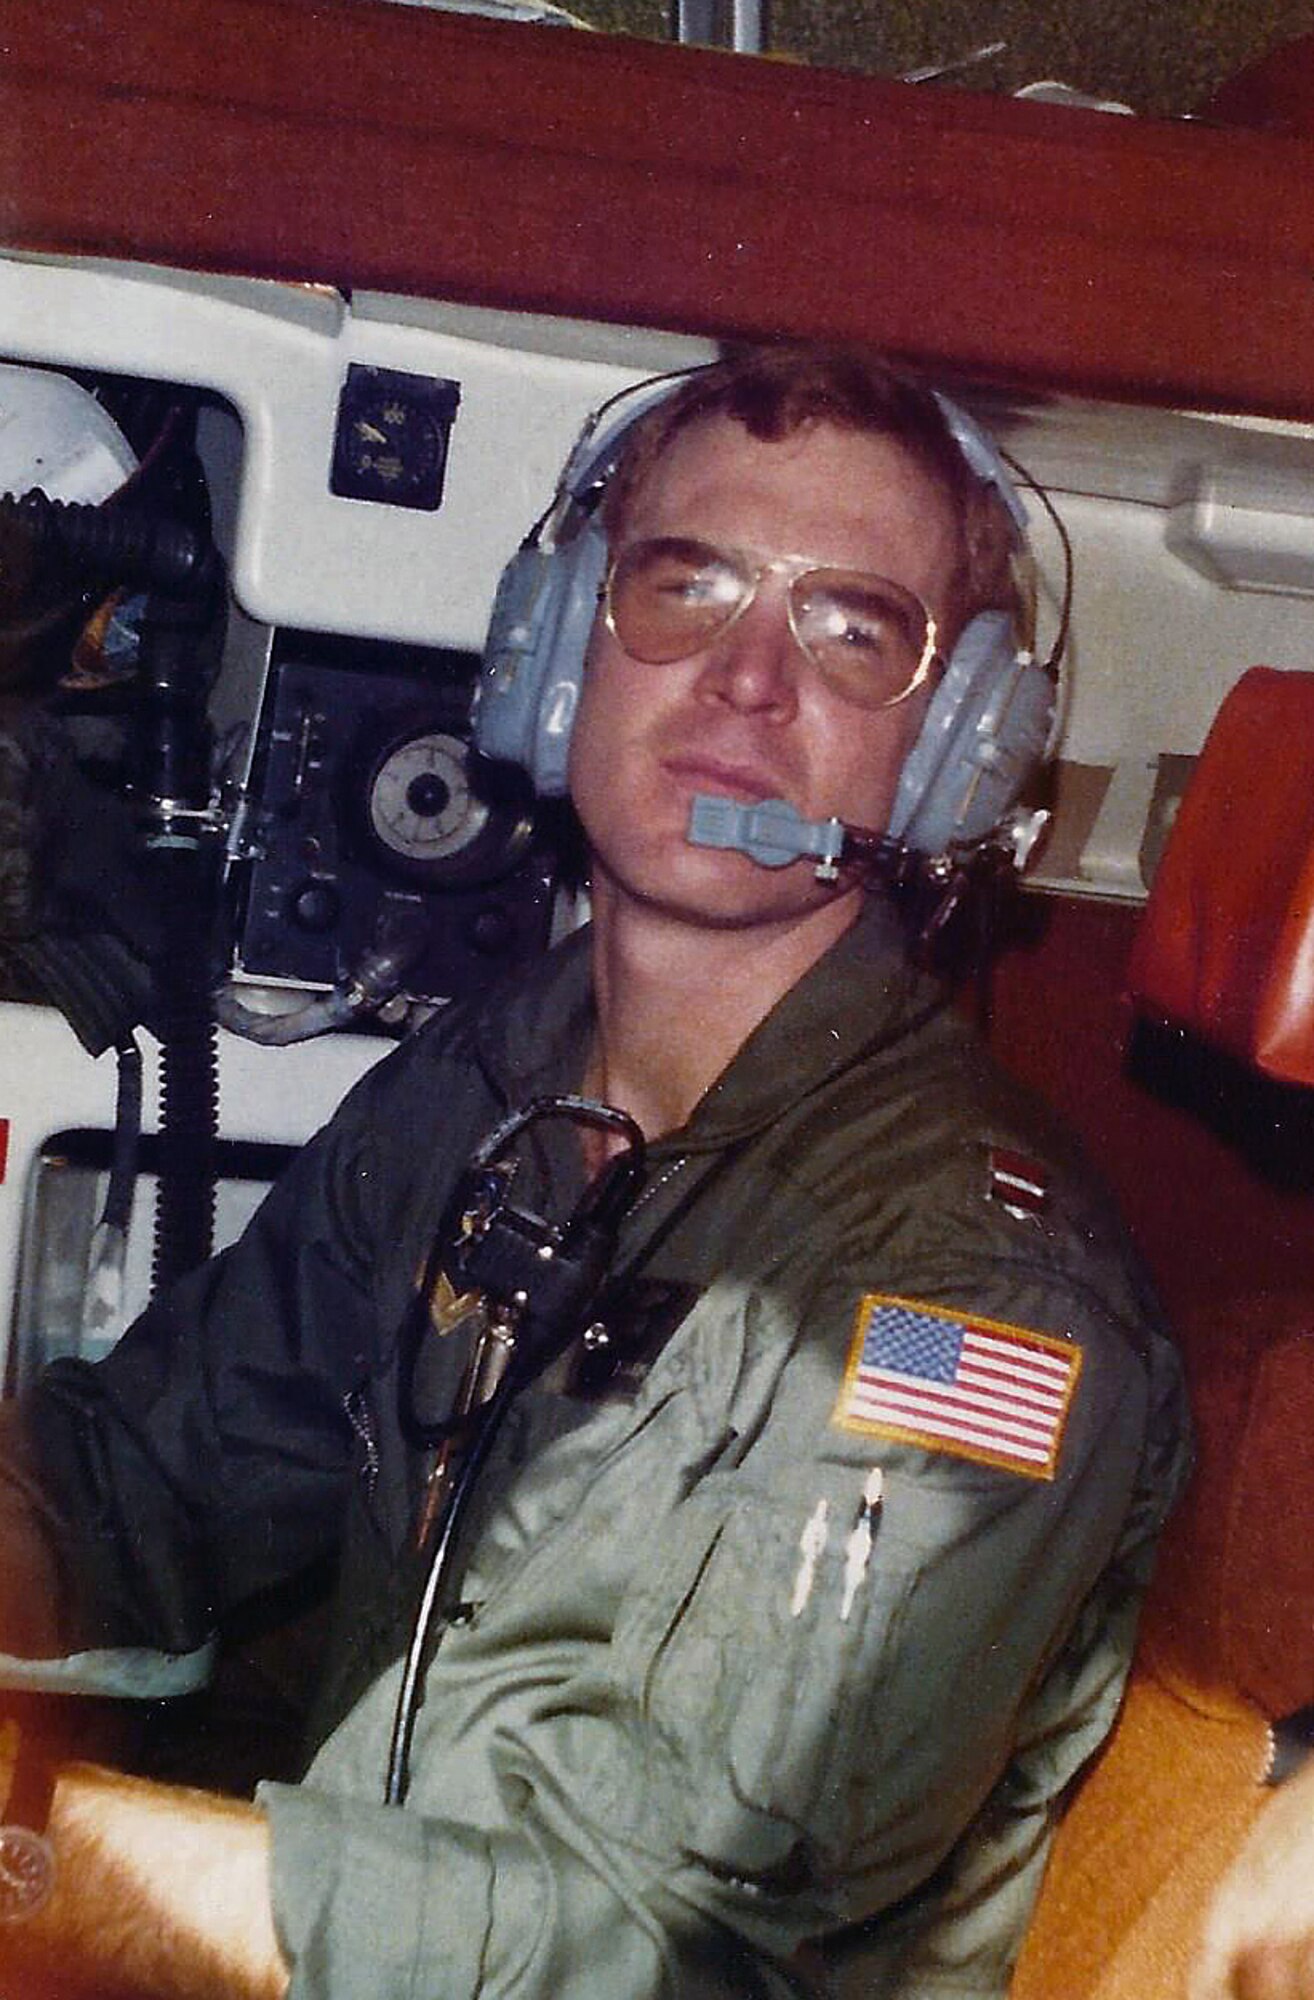 Capt. Robert Allen, 62nd Airlift Wing historian, navigates on board a C-130 aircraft during a flight in 1980 in Little Rock, Arkansas. Allen served 20 years in the Air Force and flew as a navigator aboard C-130Es, AC-130 Spectre and C-141A Aircraft. (Courtesy photo) 